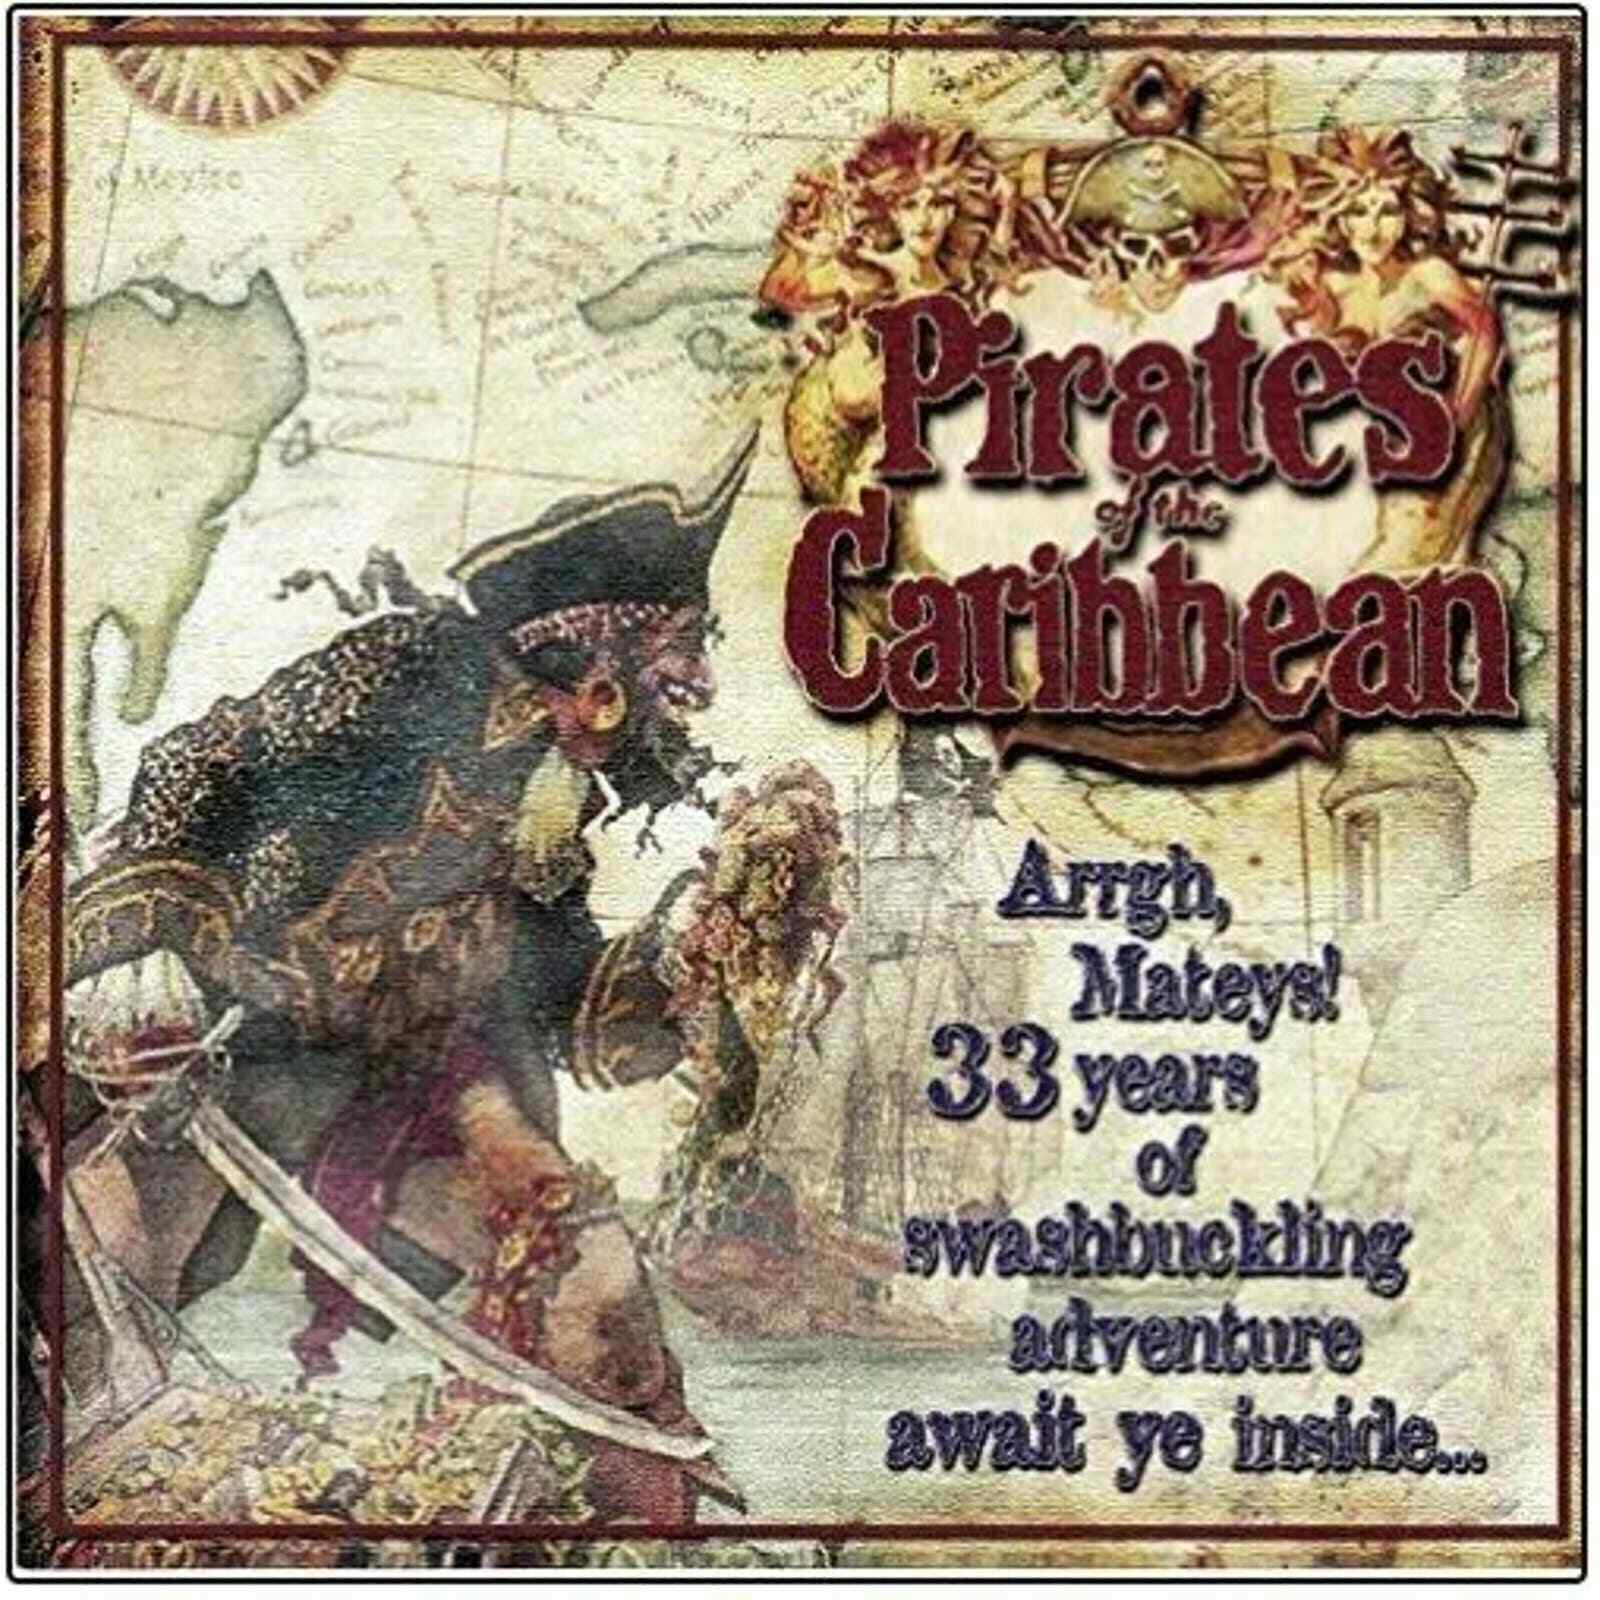 PAUL FREES - Pirates Of The Caribbean CD Excellent Condition RARE DEMO